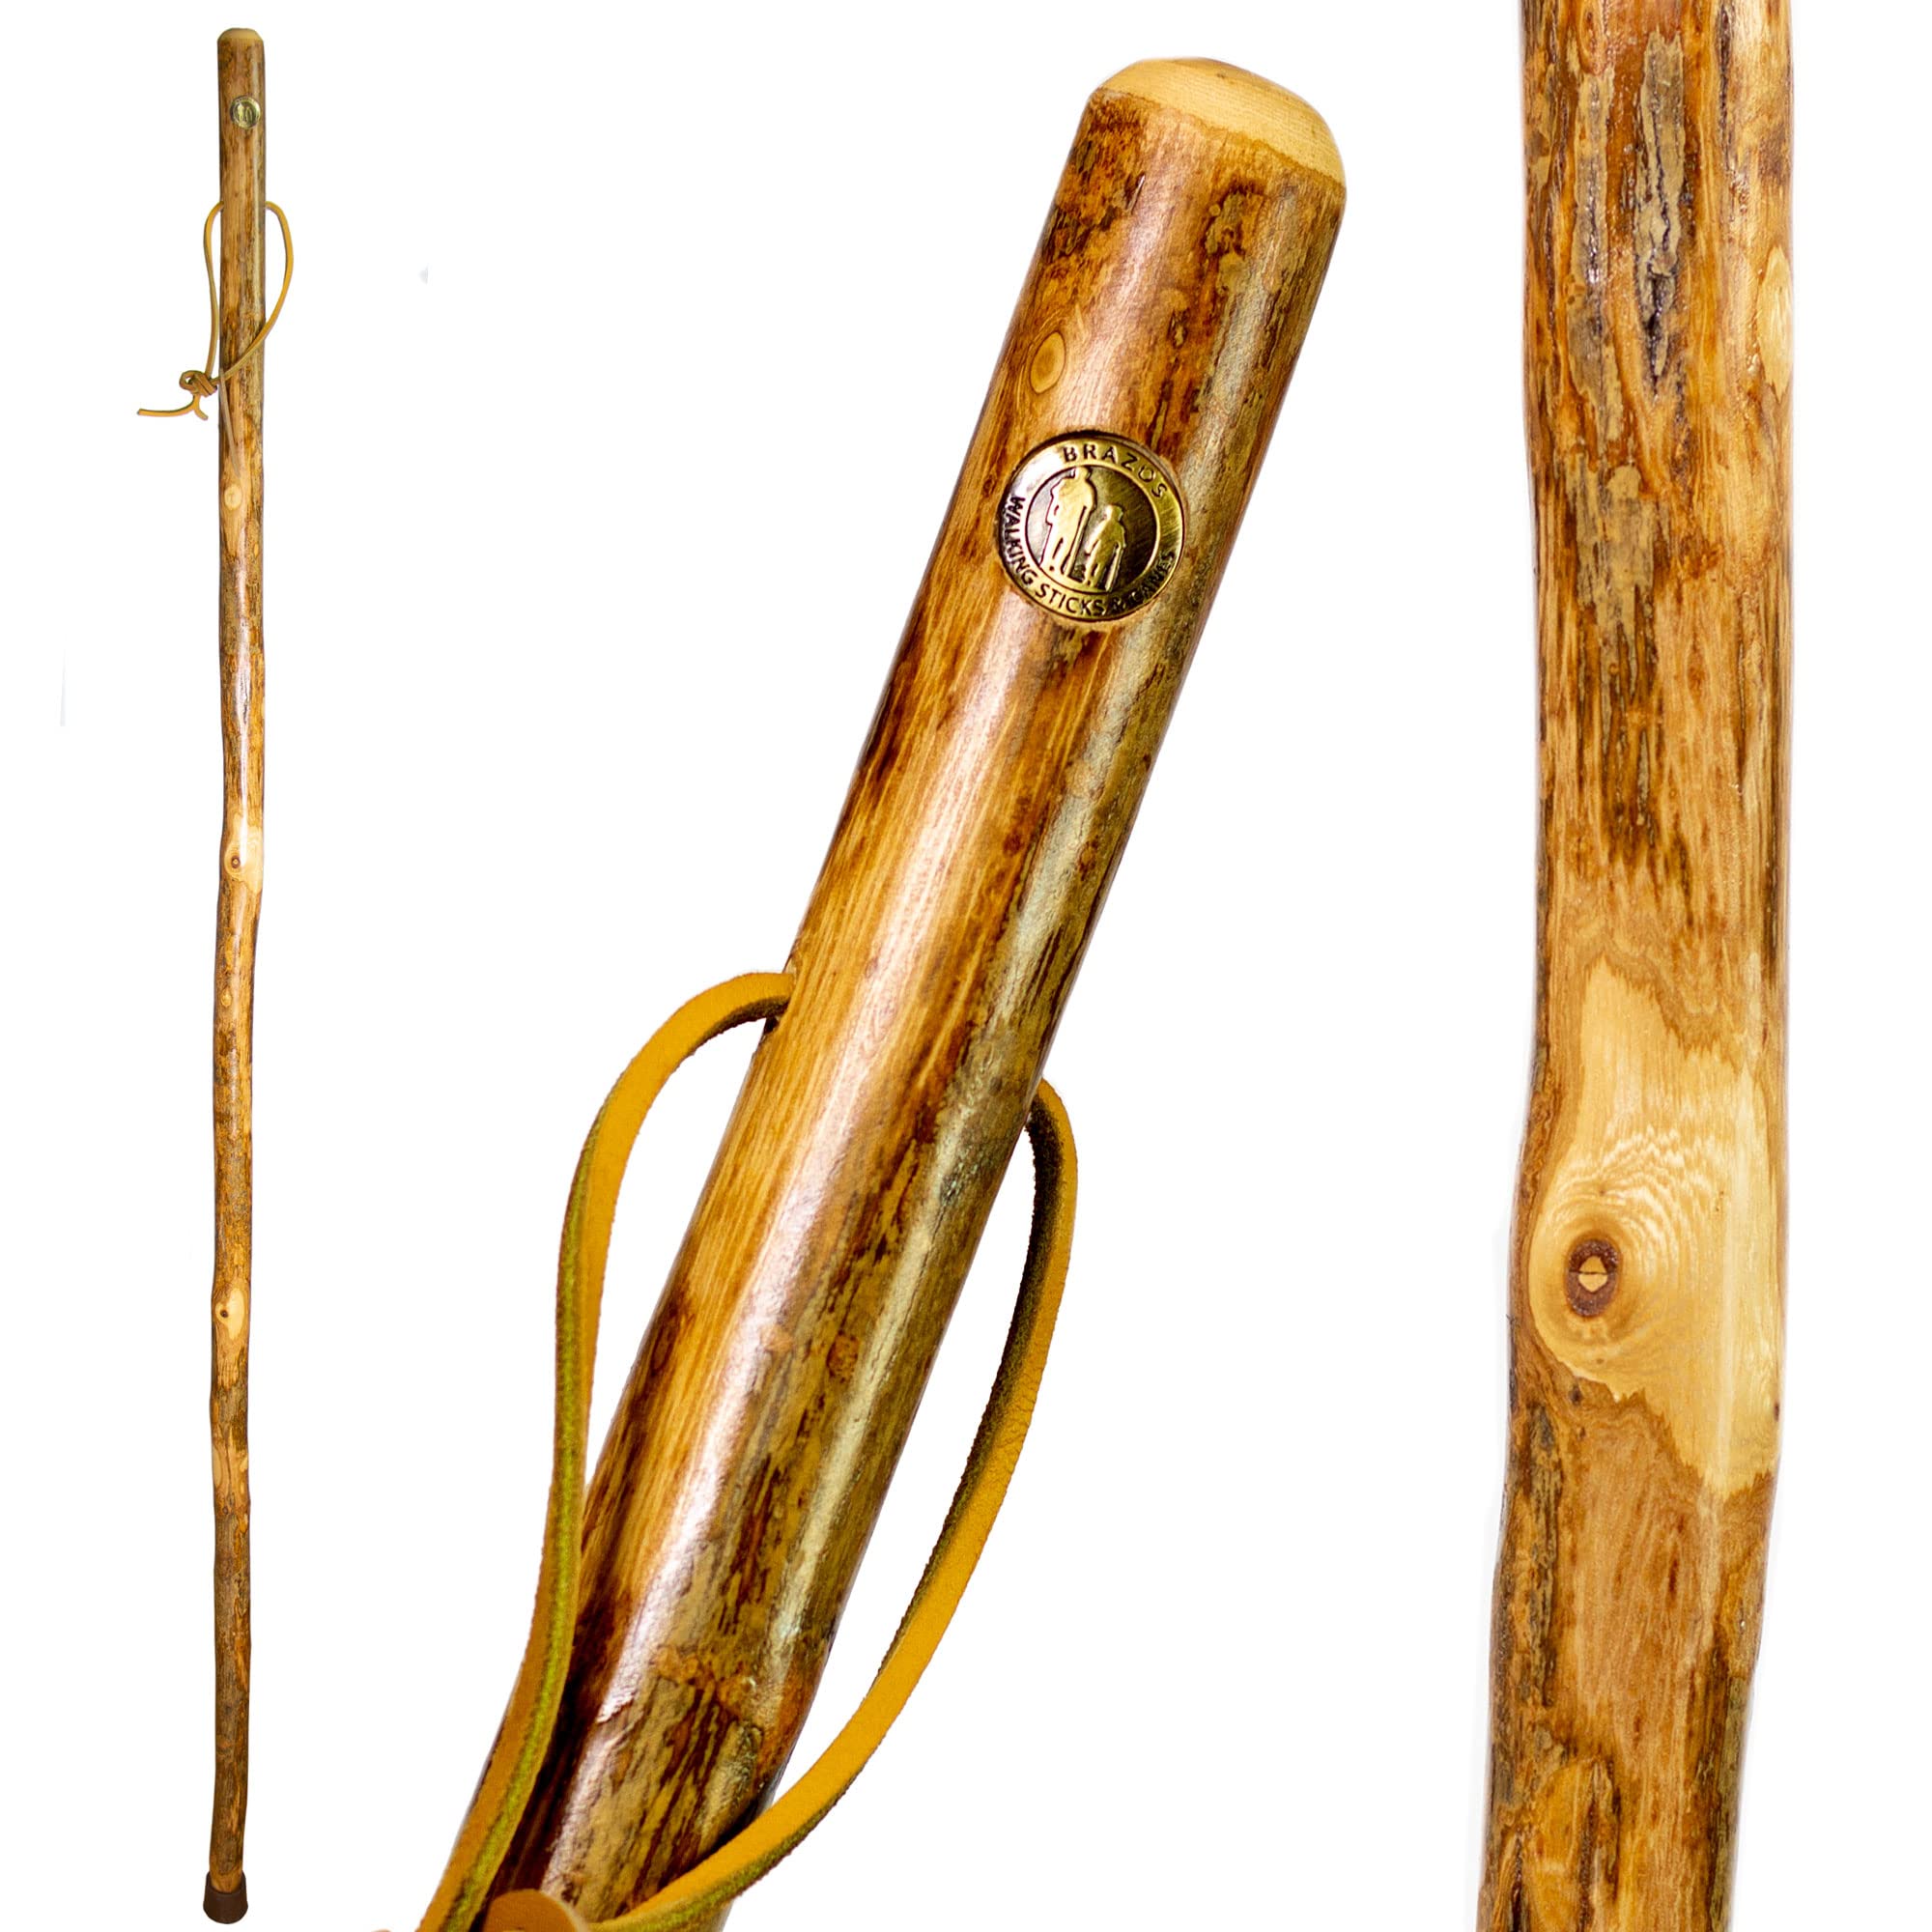 Brazos Rustic Wood Walking Stick Hardwood Traditional Style Handle for Men Women Made in The USA 41並行輸入品